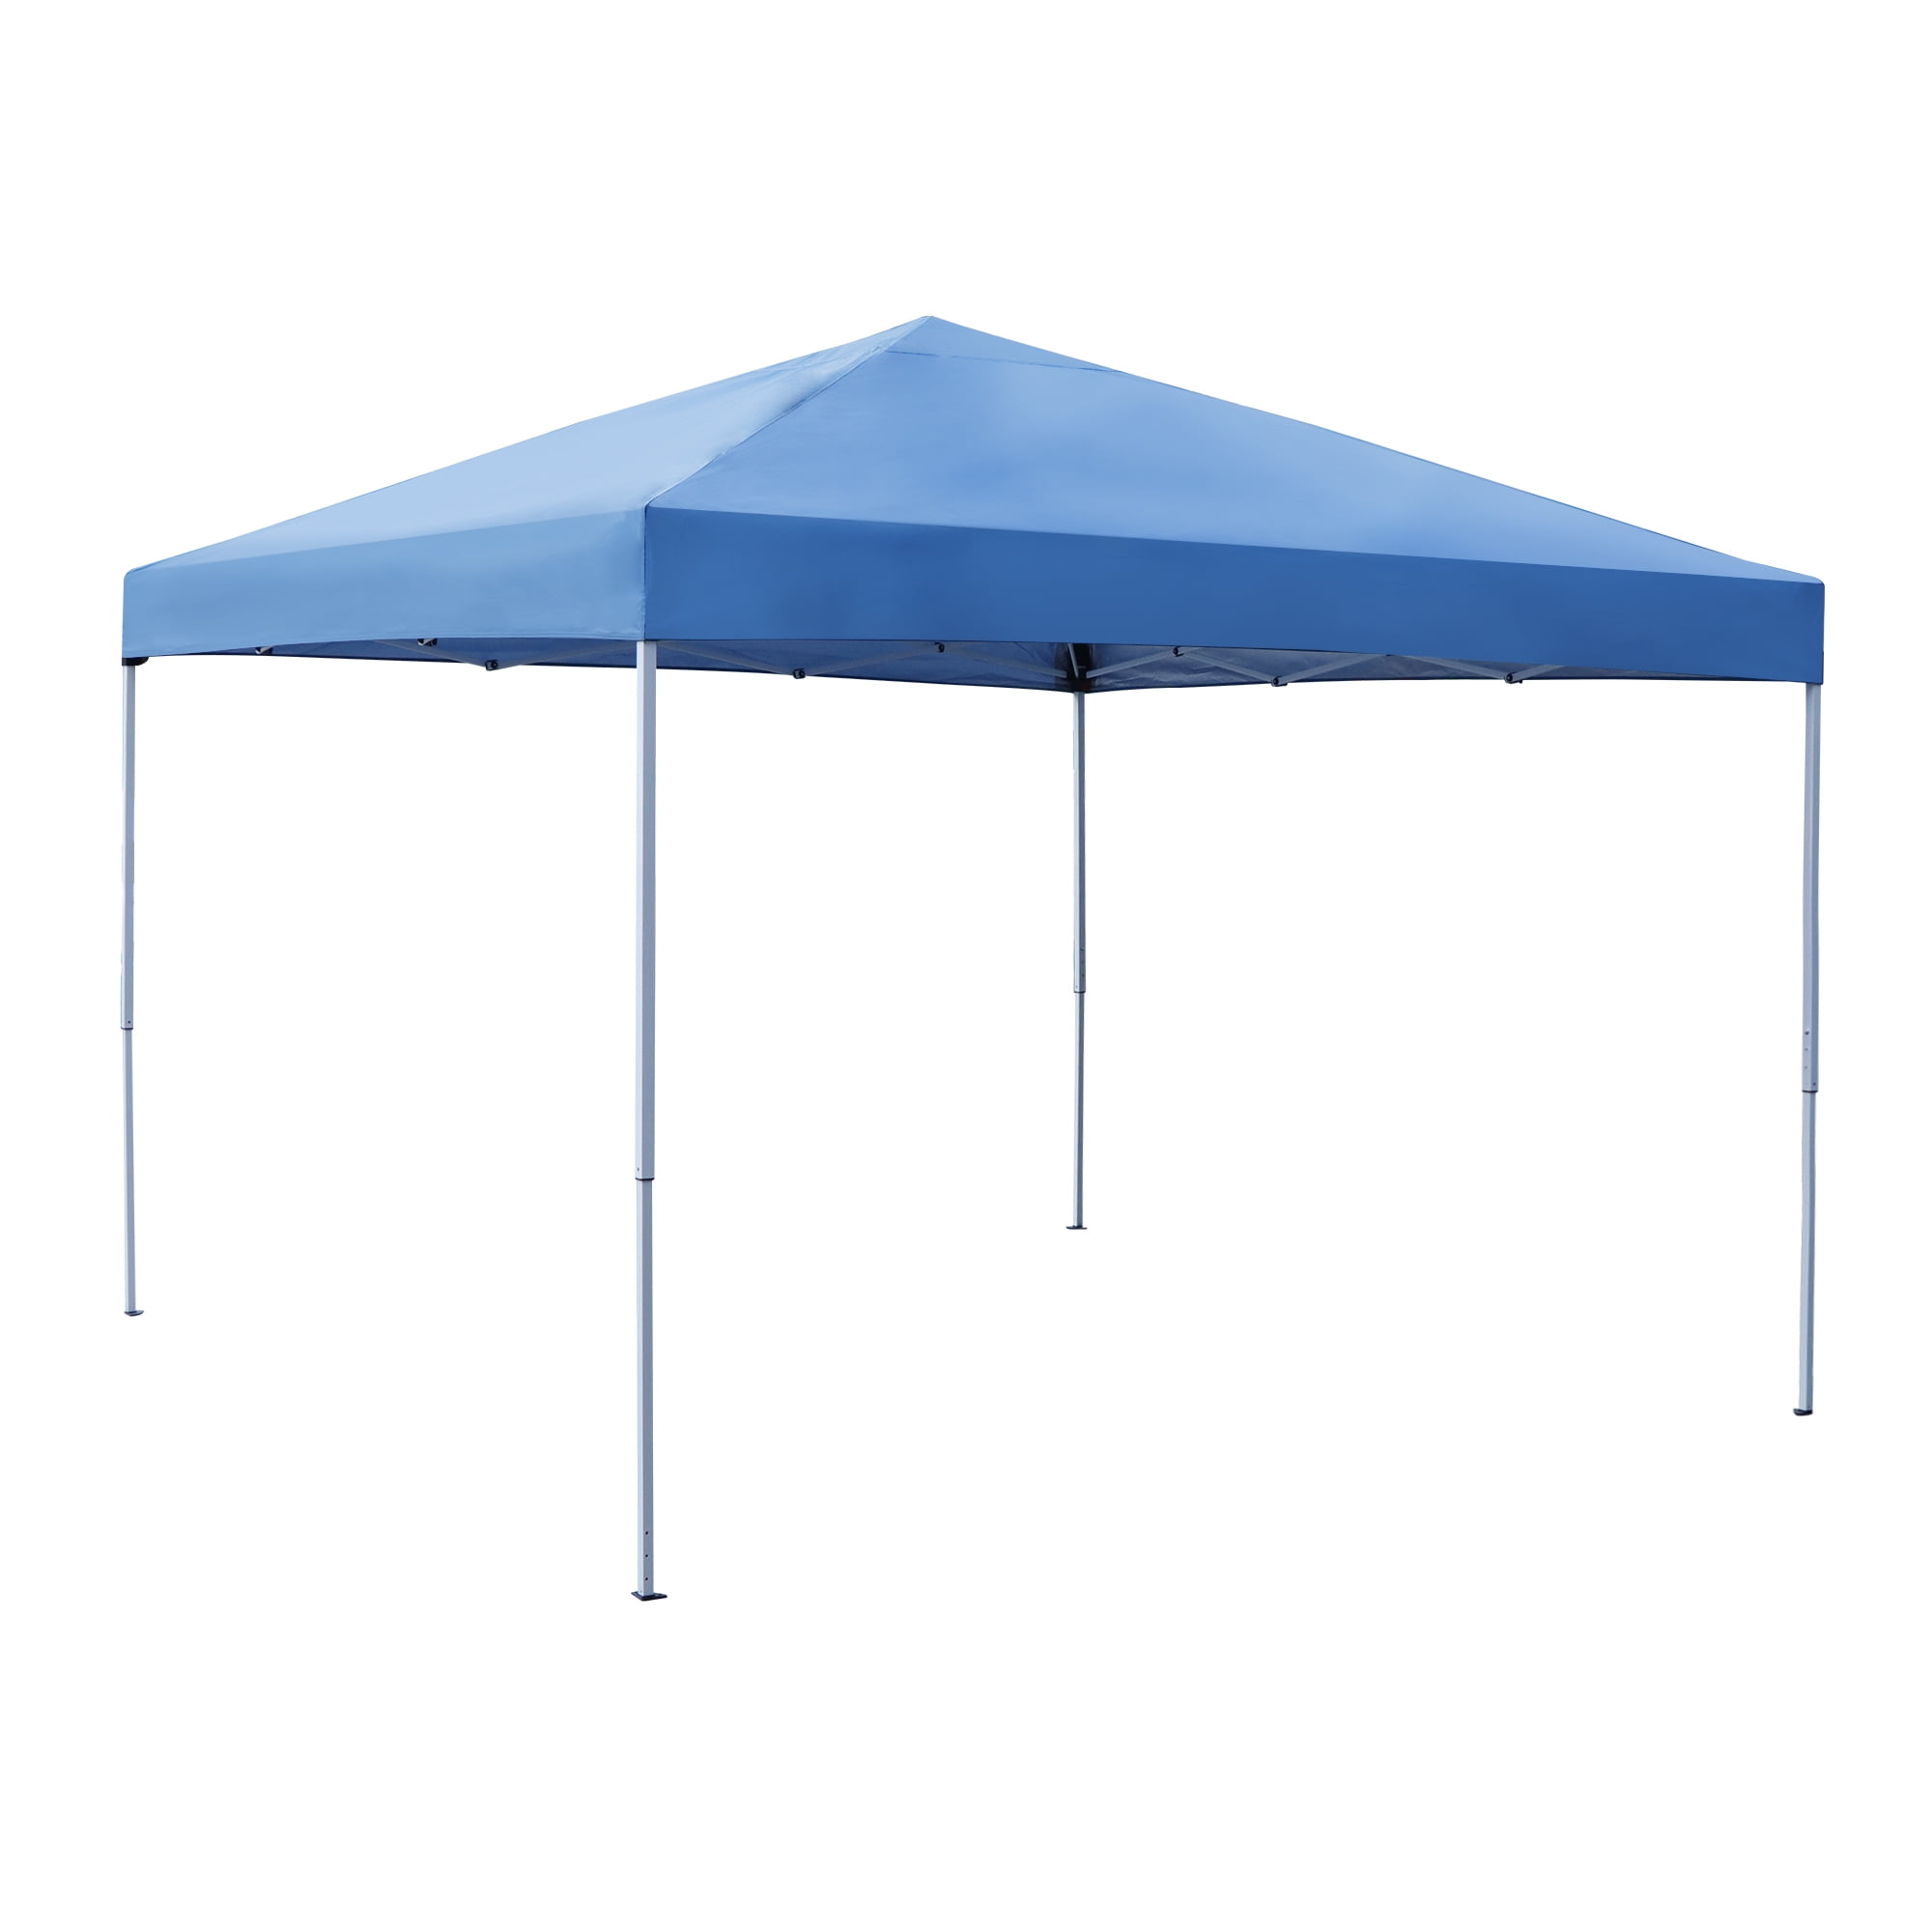 Prominent Dicteren speel piano ZENY Pre-Assembled 10 x 10ft Foldable Canopy Party Tent Pop-up Height  Adjustable with Casters - Walmart.com